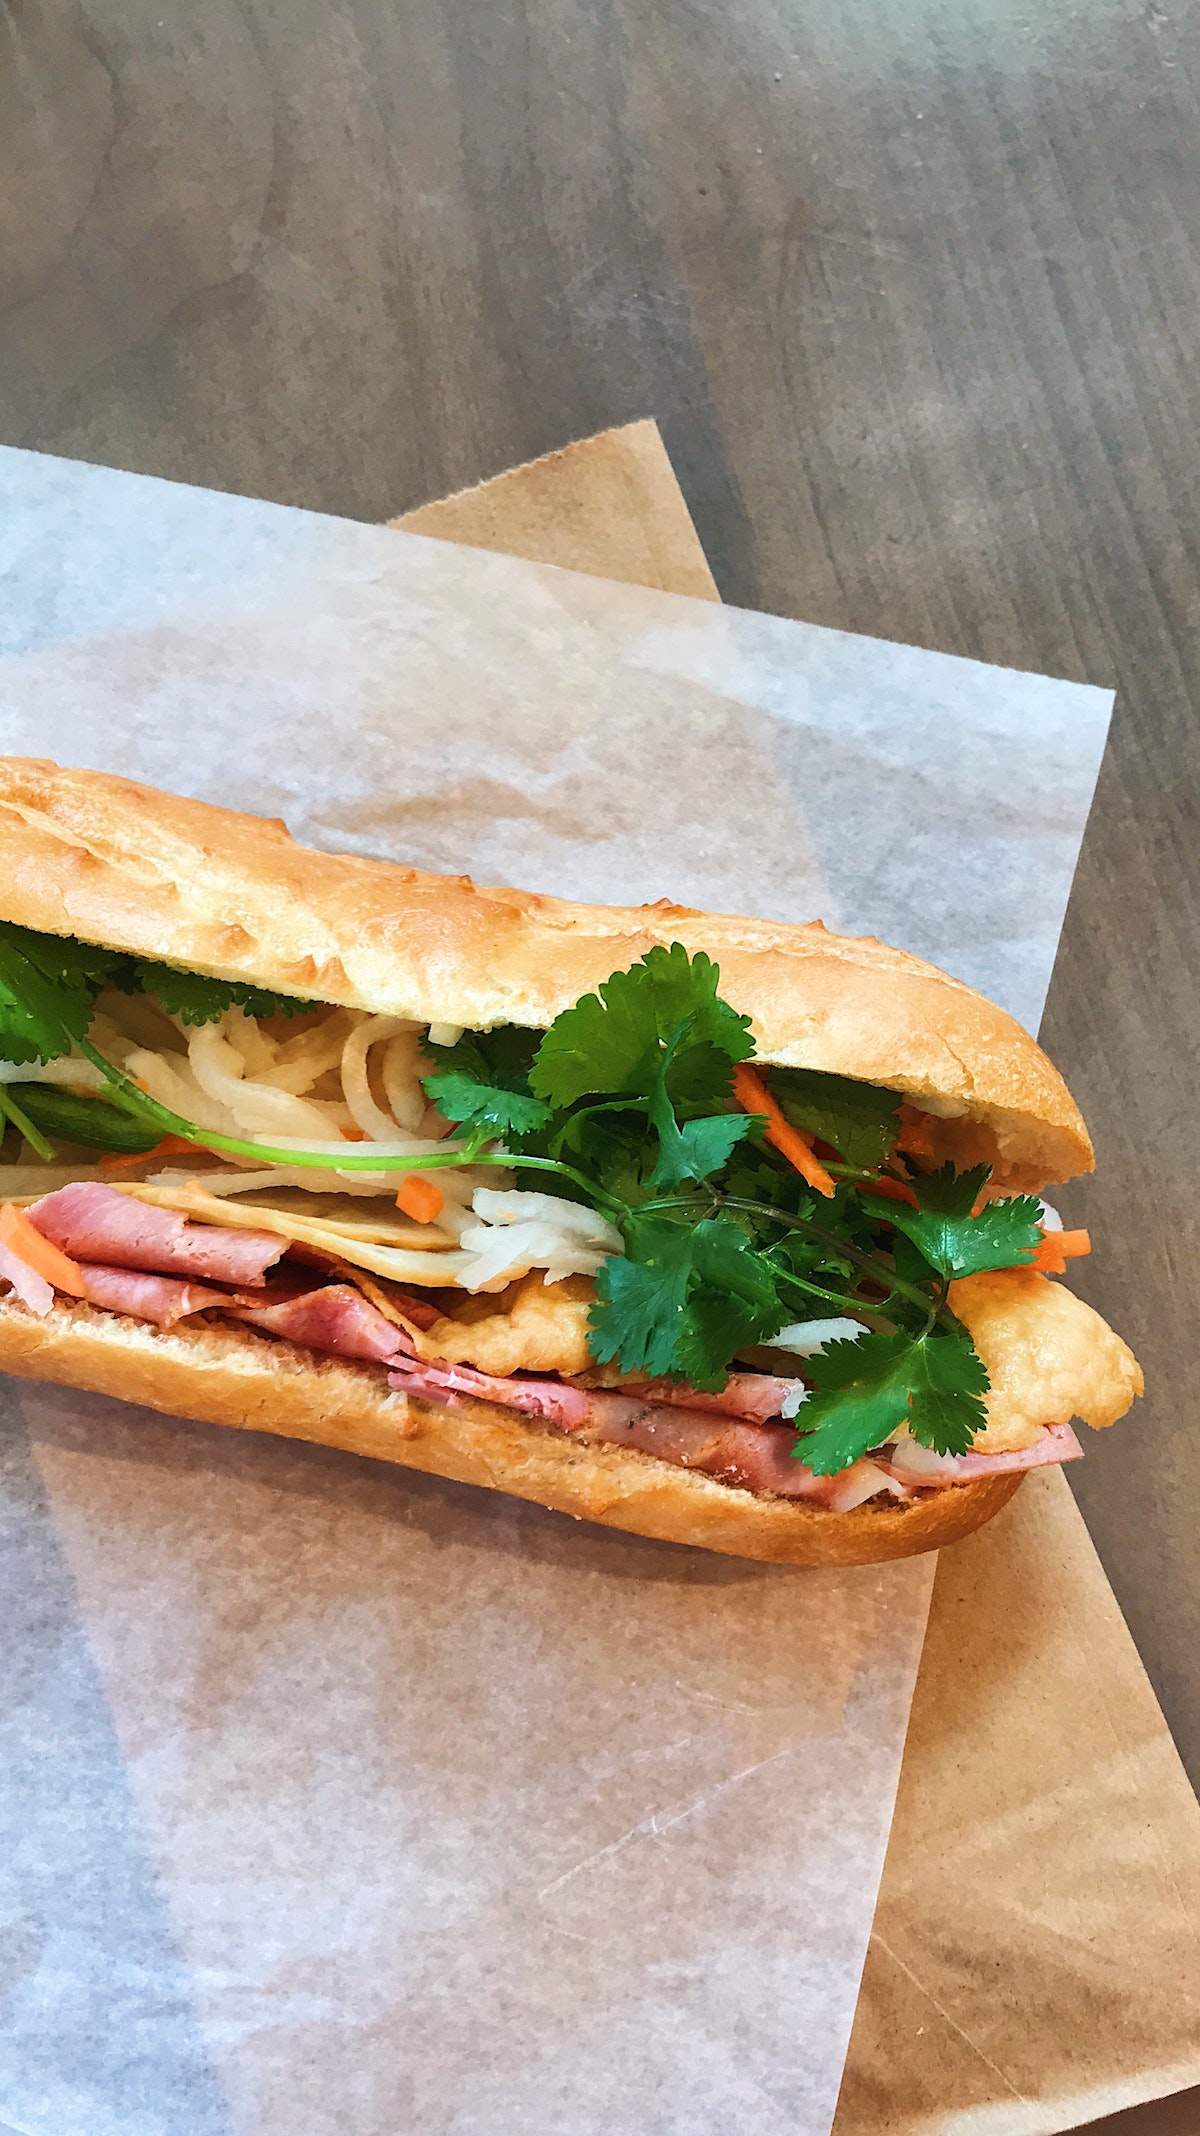 Close up of a banh mi sandwich, a baguette cut lengthwise and filled with meat and vegetables